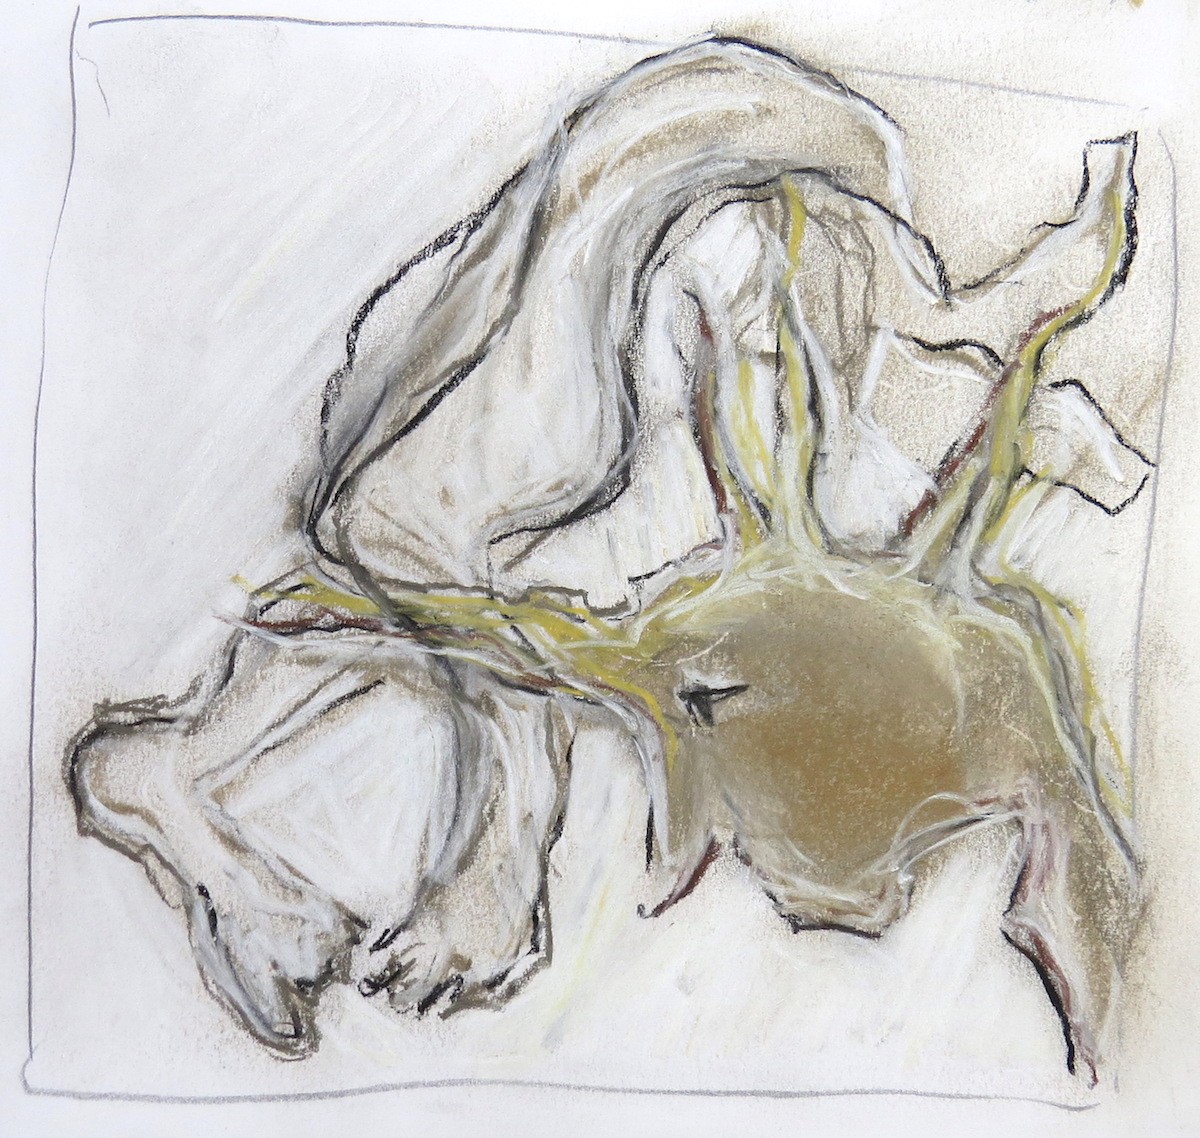 studio drawing in charcoal and pastel by Canadian contemporary artist barbra edwards, Gulf Islands, BC